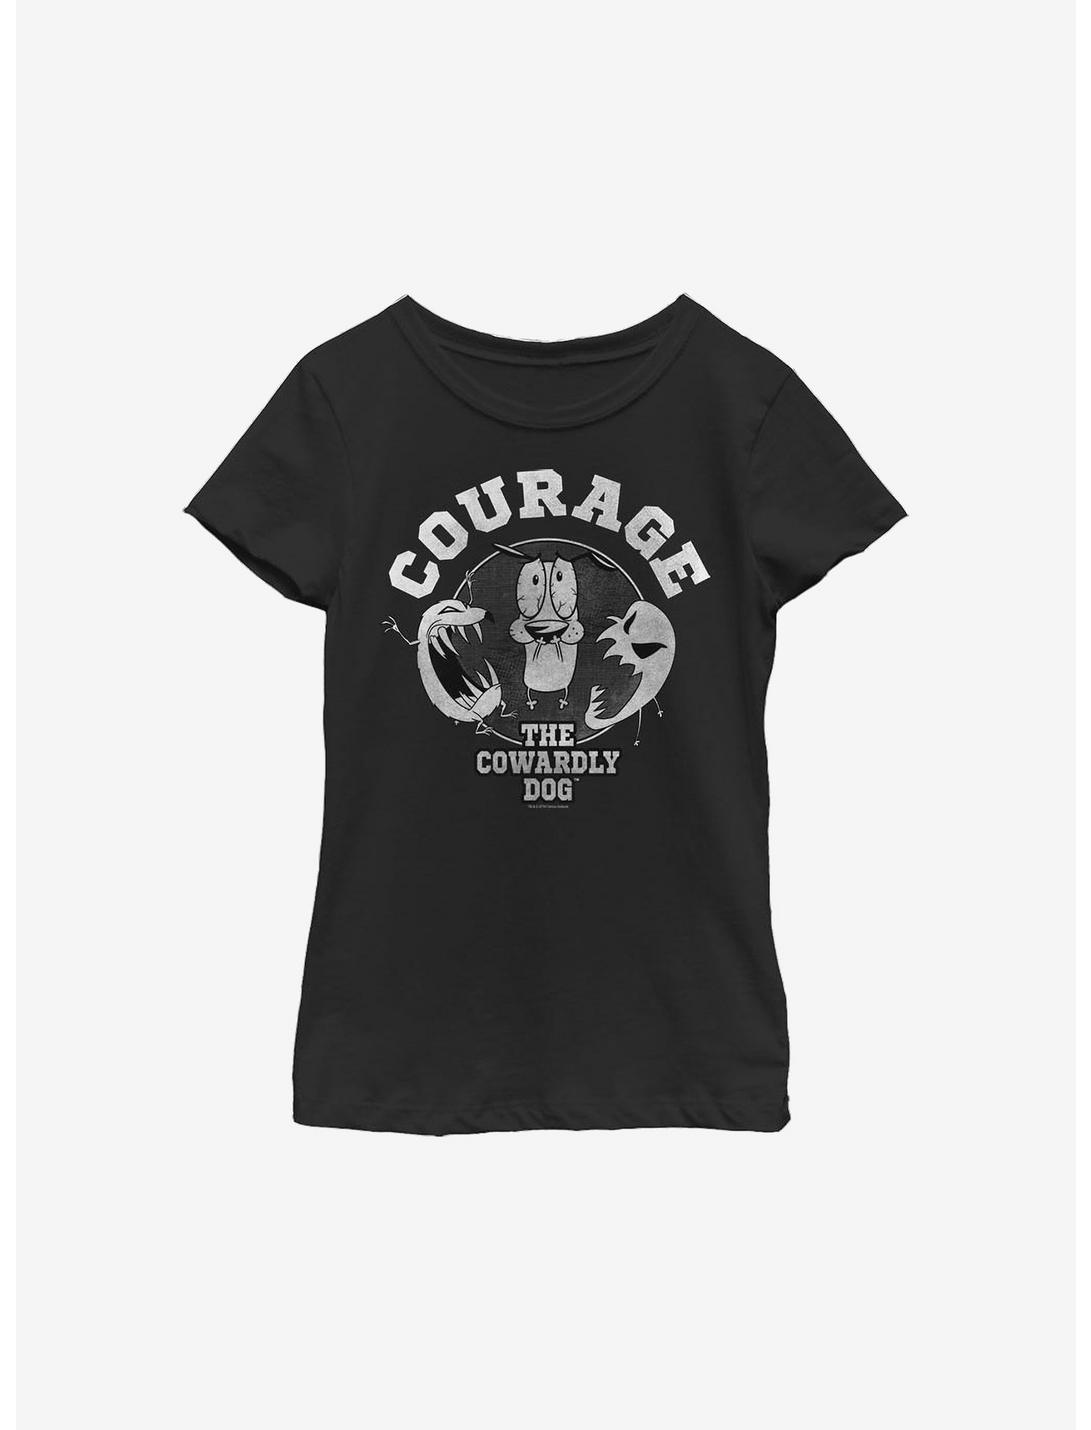 Courage The Cowardly Dog Courage Badge Youth Girls T-Shirt, BLACK, hi-res